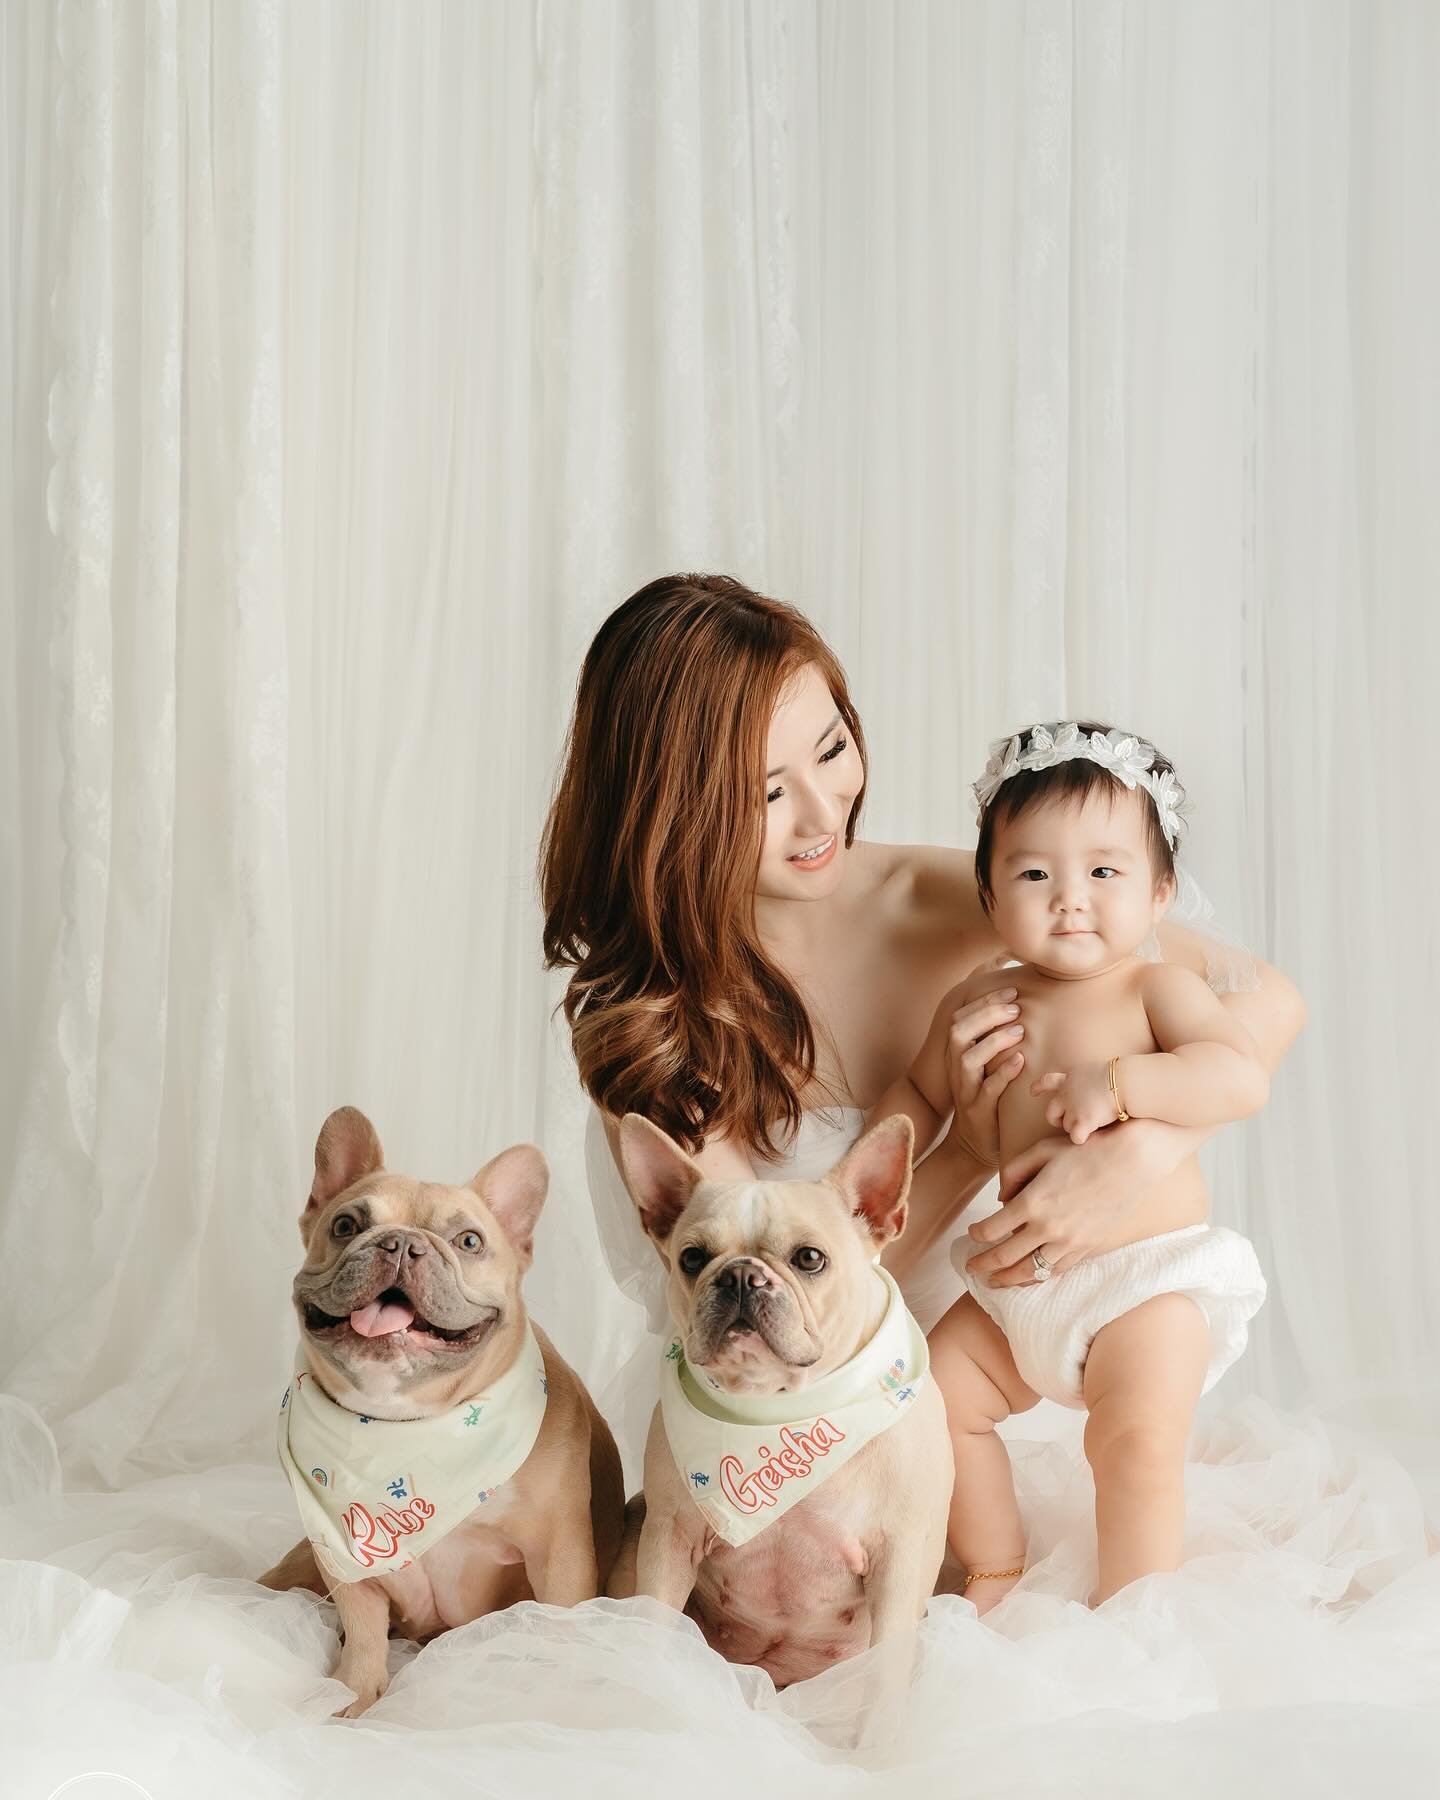 Capturing moments of pure love and joy with this gorgeous mom, her adorable daughter, and their beautiful furry companions 📸💕
#FamilyPortrait #PetLove